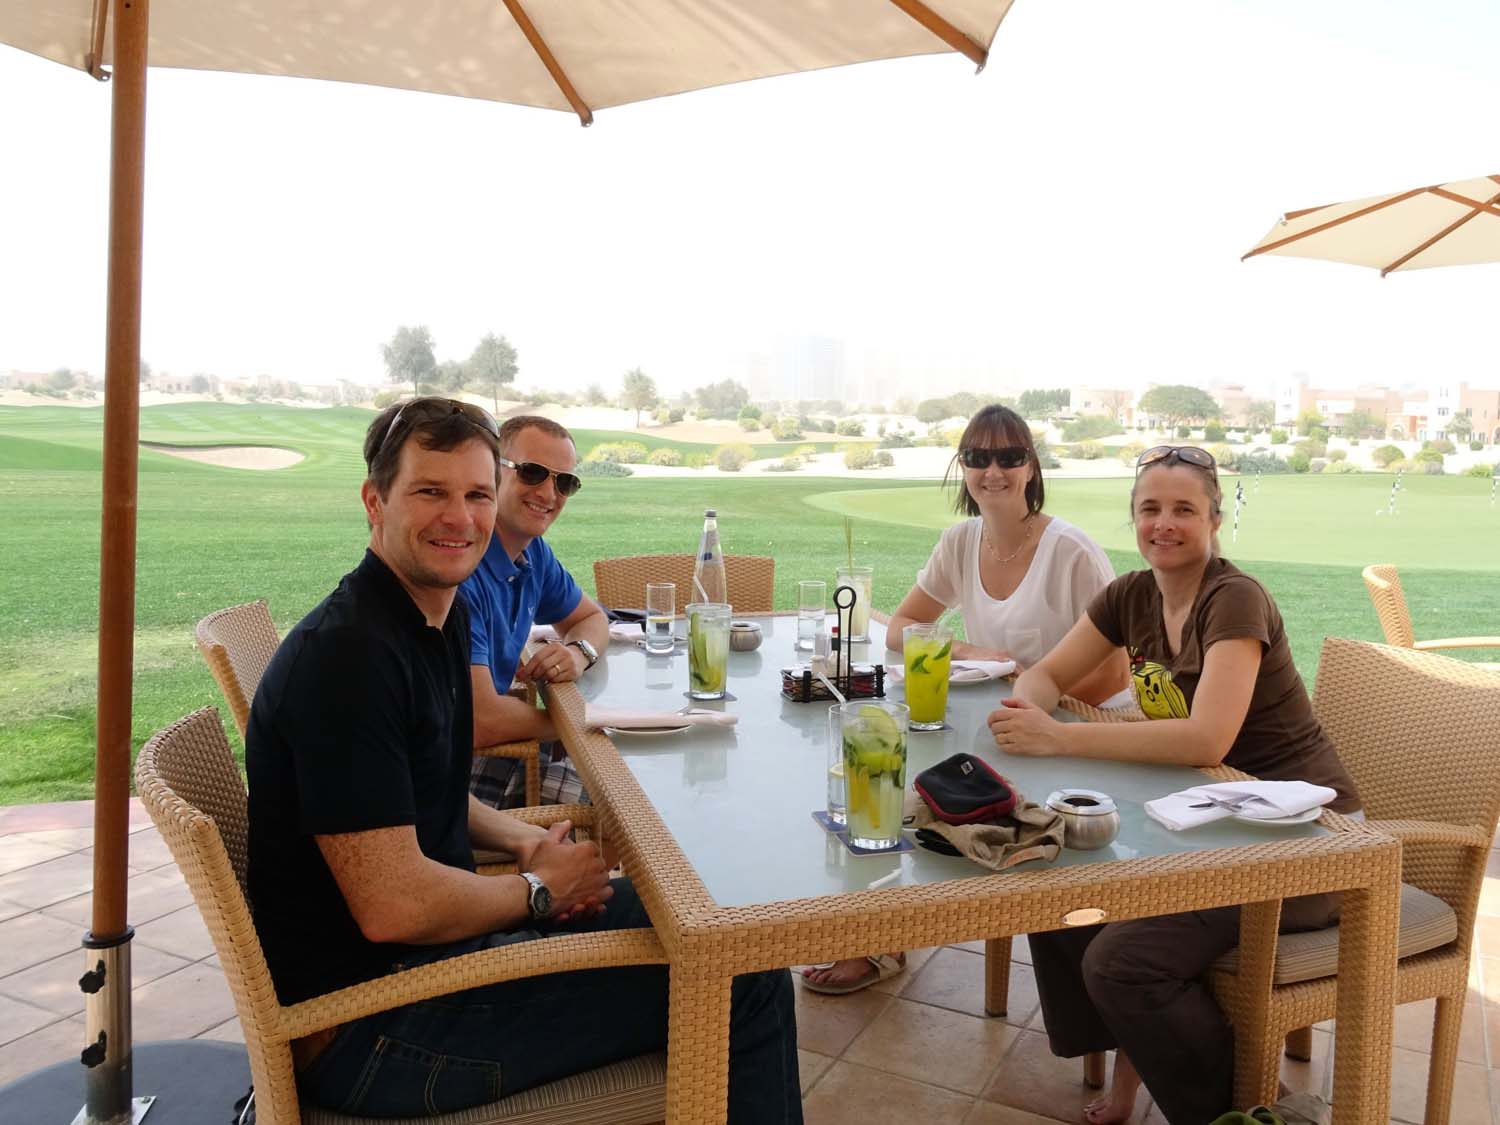 lunch with Roger and Joanne near their home in Dubai